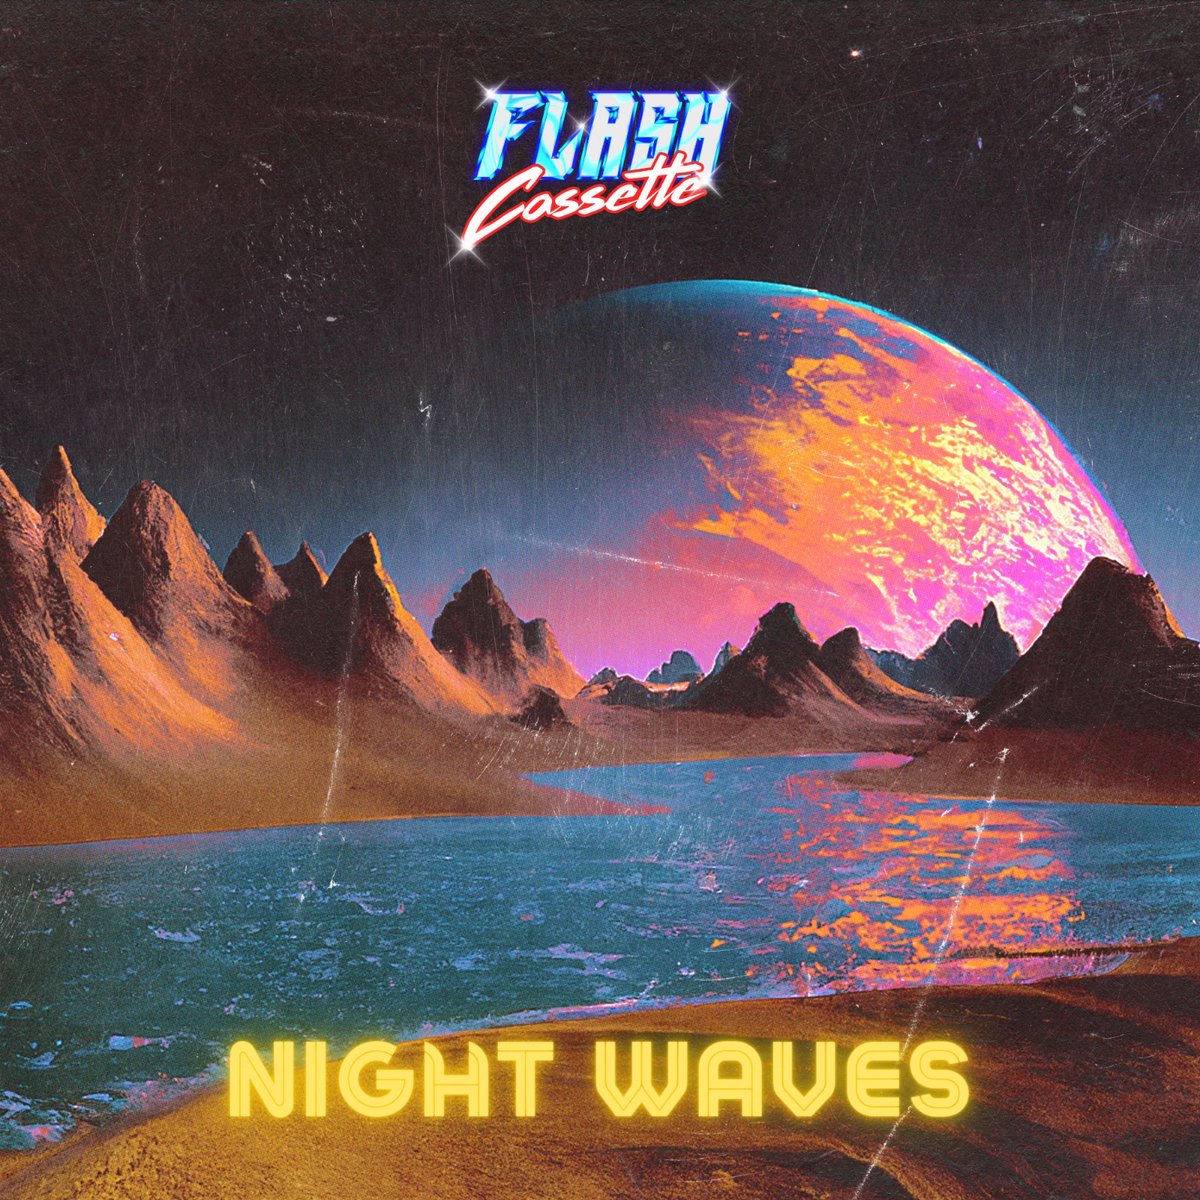 Brand new Flash Cassette album ‘Night Waves’ will be arriving 4th October 2024! Beyond excited for folks to hear this collection of electronic jams! Cover art by the ridiculously talented Nibera. ⚡️📼 #NewAlbum #synthfunk #synthwave #80s #retrowave #albumart #niberavisuals